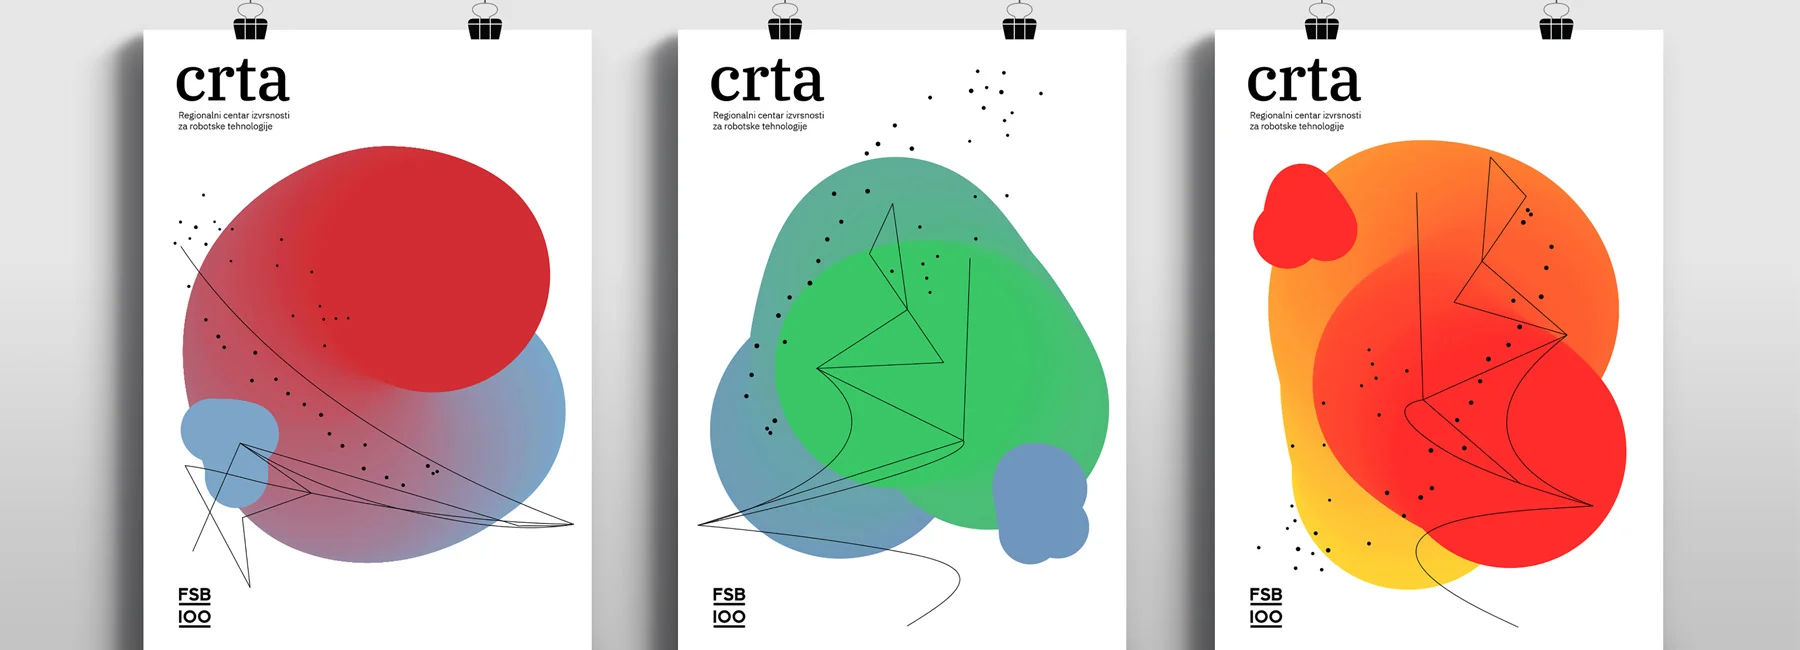 ‘CRTA’ visual identity was created by using artificial intelligence